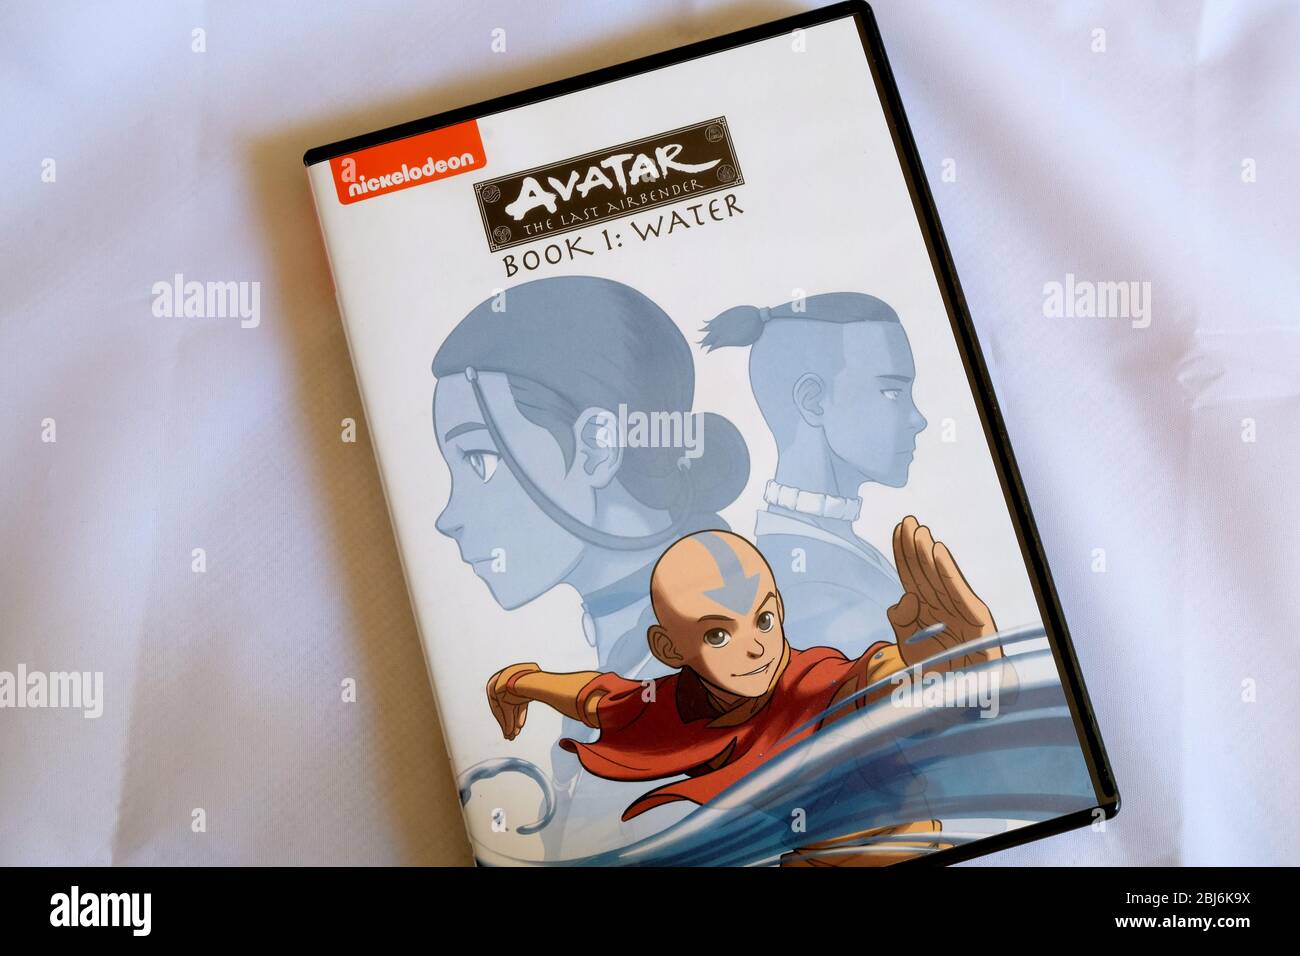 DVD box of Nickelodeon's "Avatar - The Last Airbender: The Complete Series"  animated television show released in 2015; Book 1: Water Stock Photo - Alamy